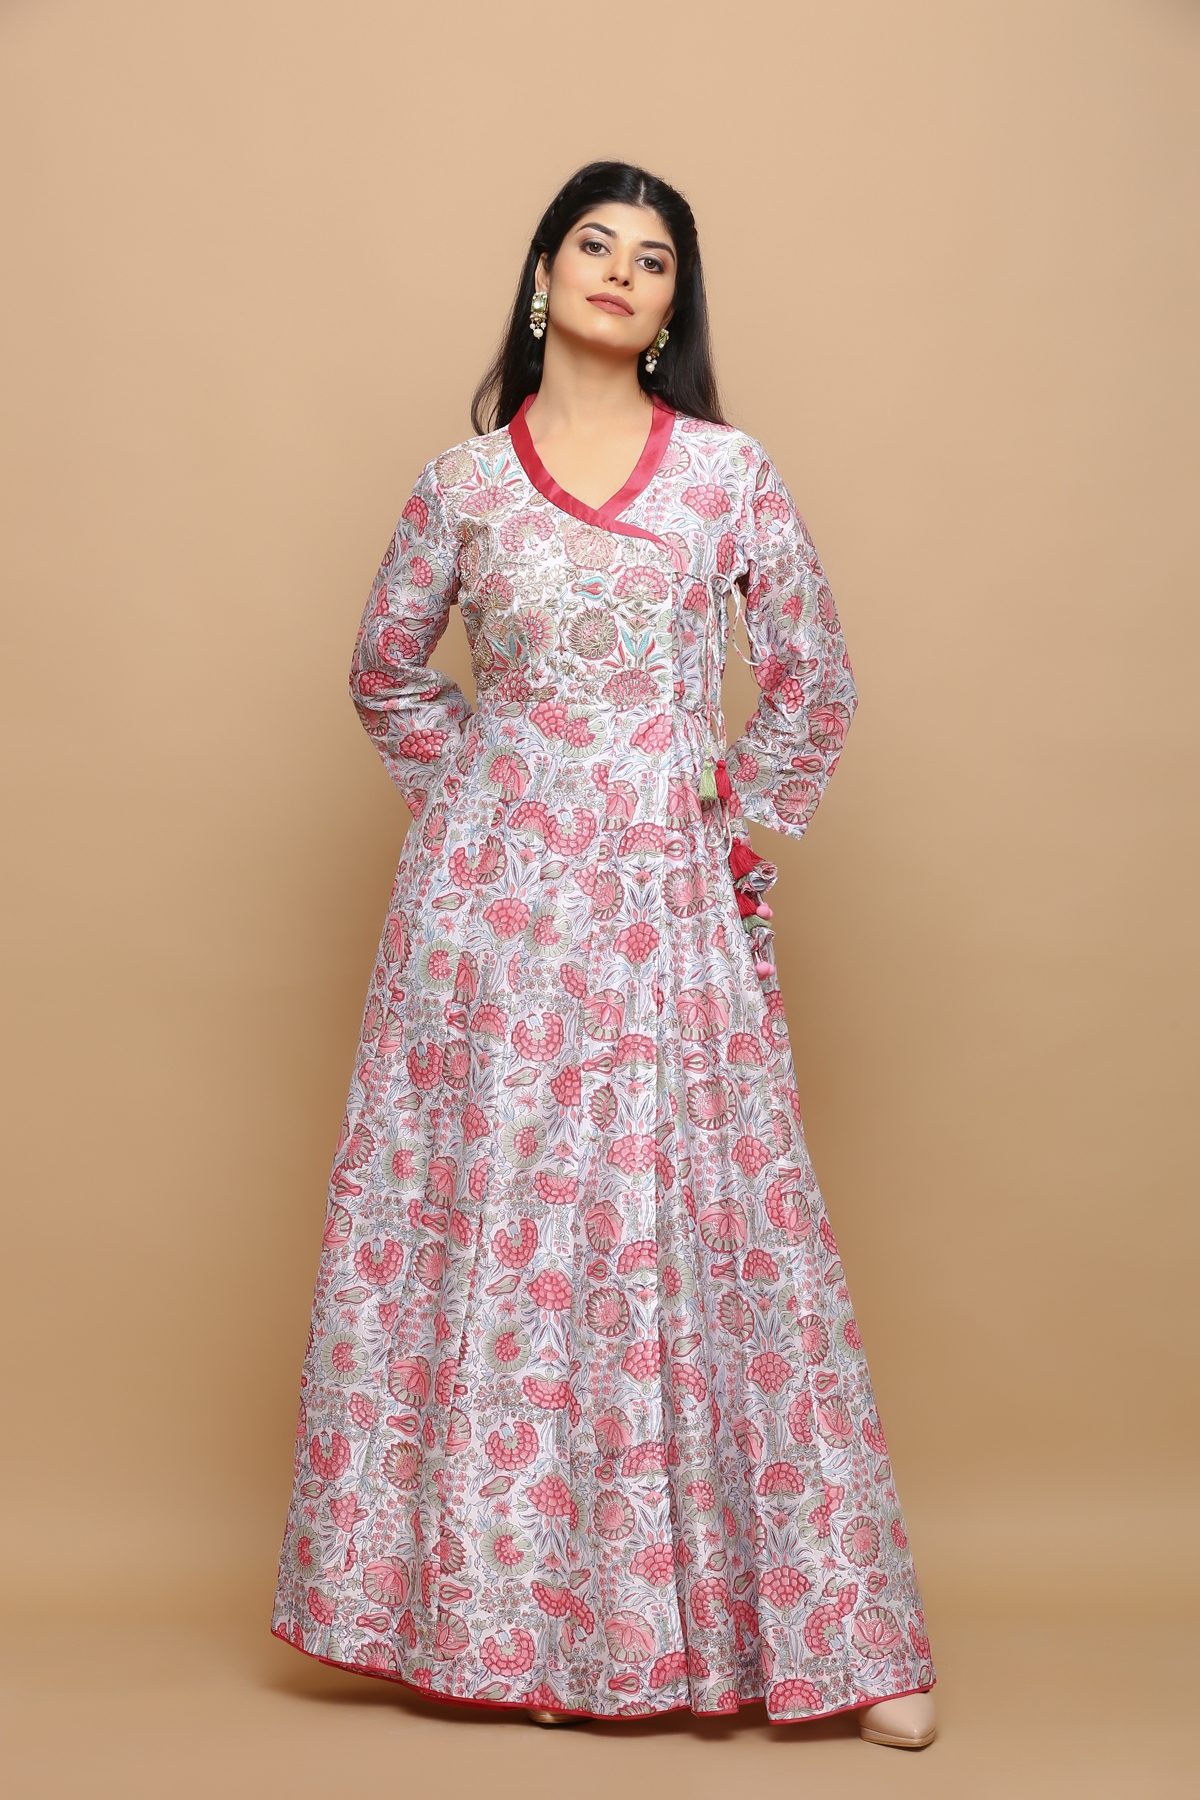 KAARAH BY KAAVYA | White block printed jaal chanderi angrakha anarkali kurta with handwork on the yoke and tassels on the side and is fully lined . undefined